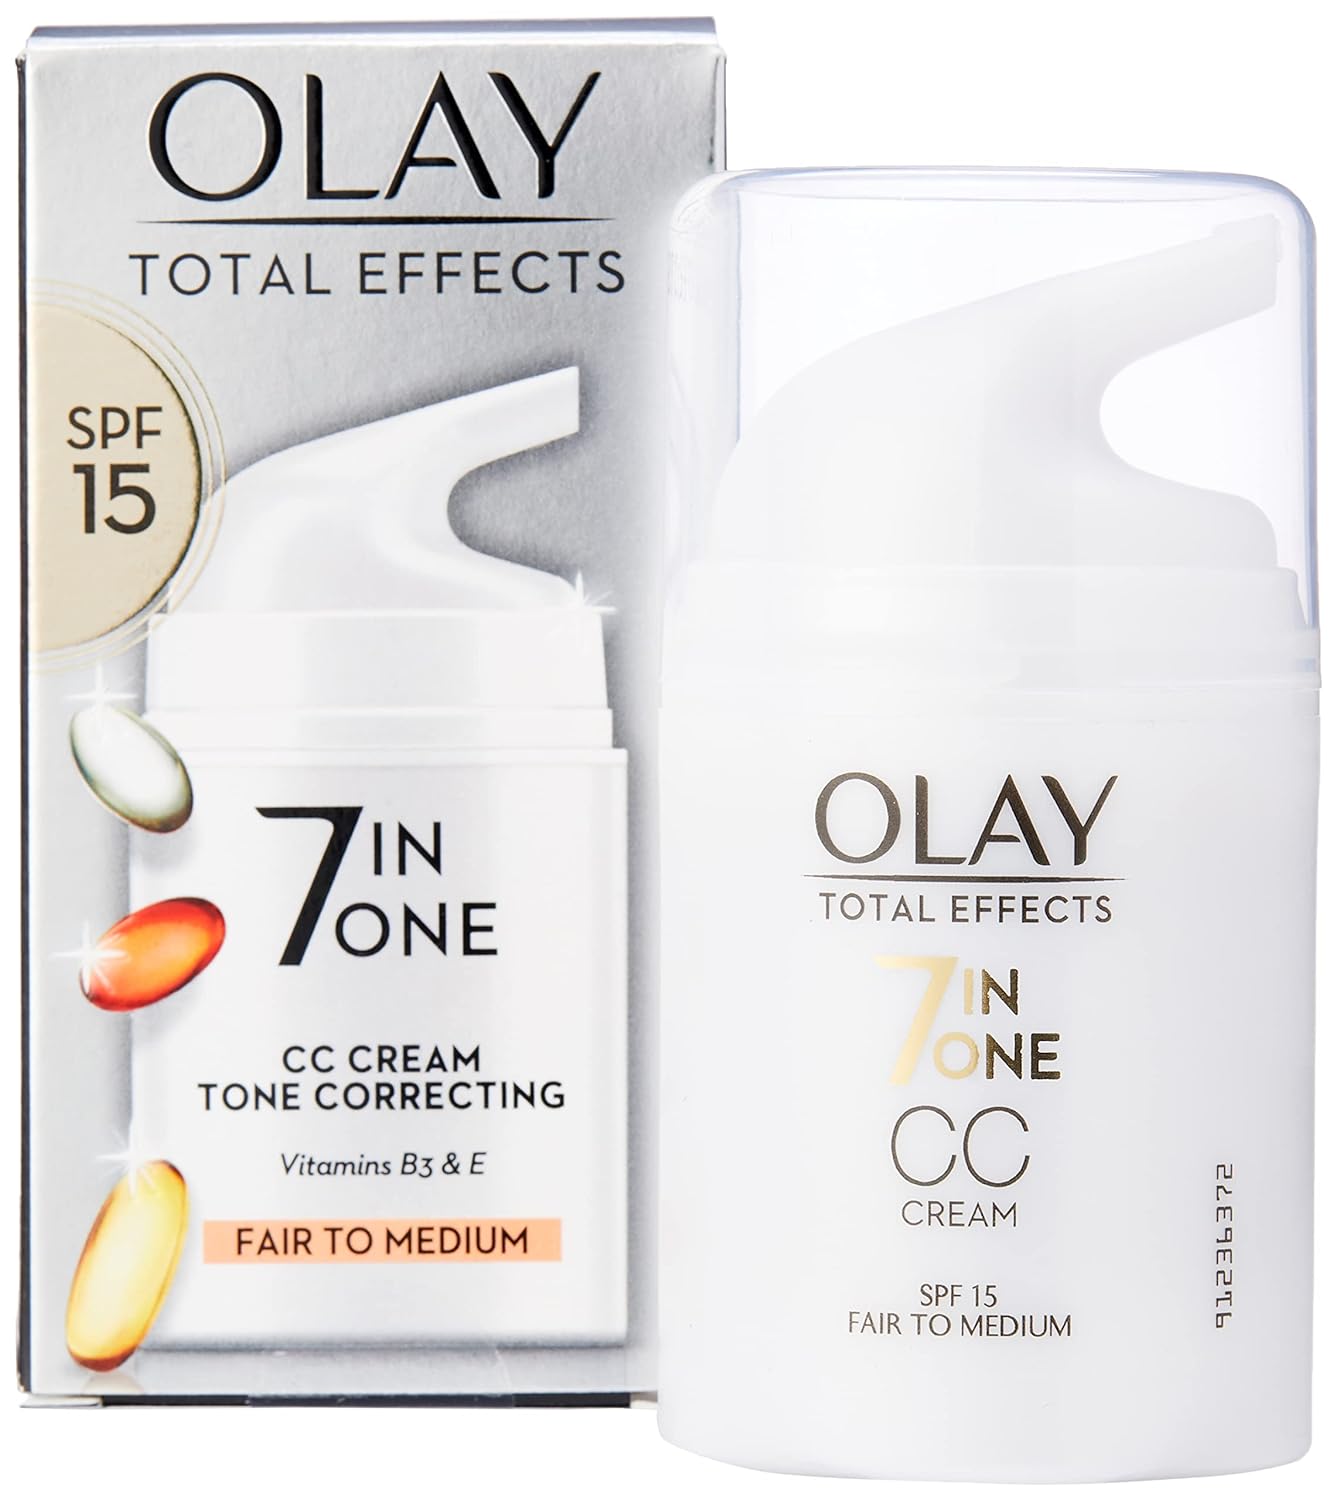 Olay SPF 15 Total Effects CC Cream Complexion Corrector for 